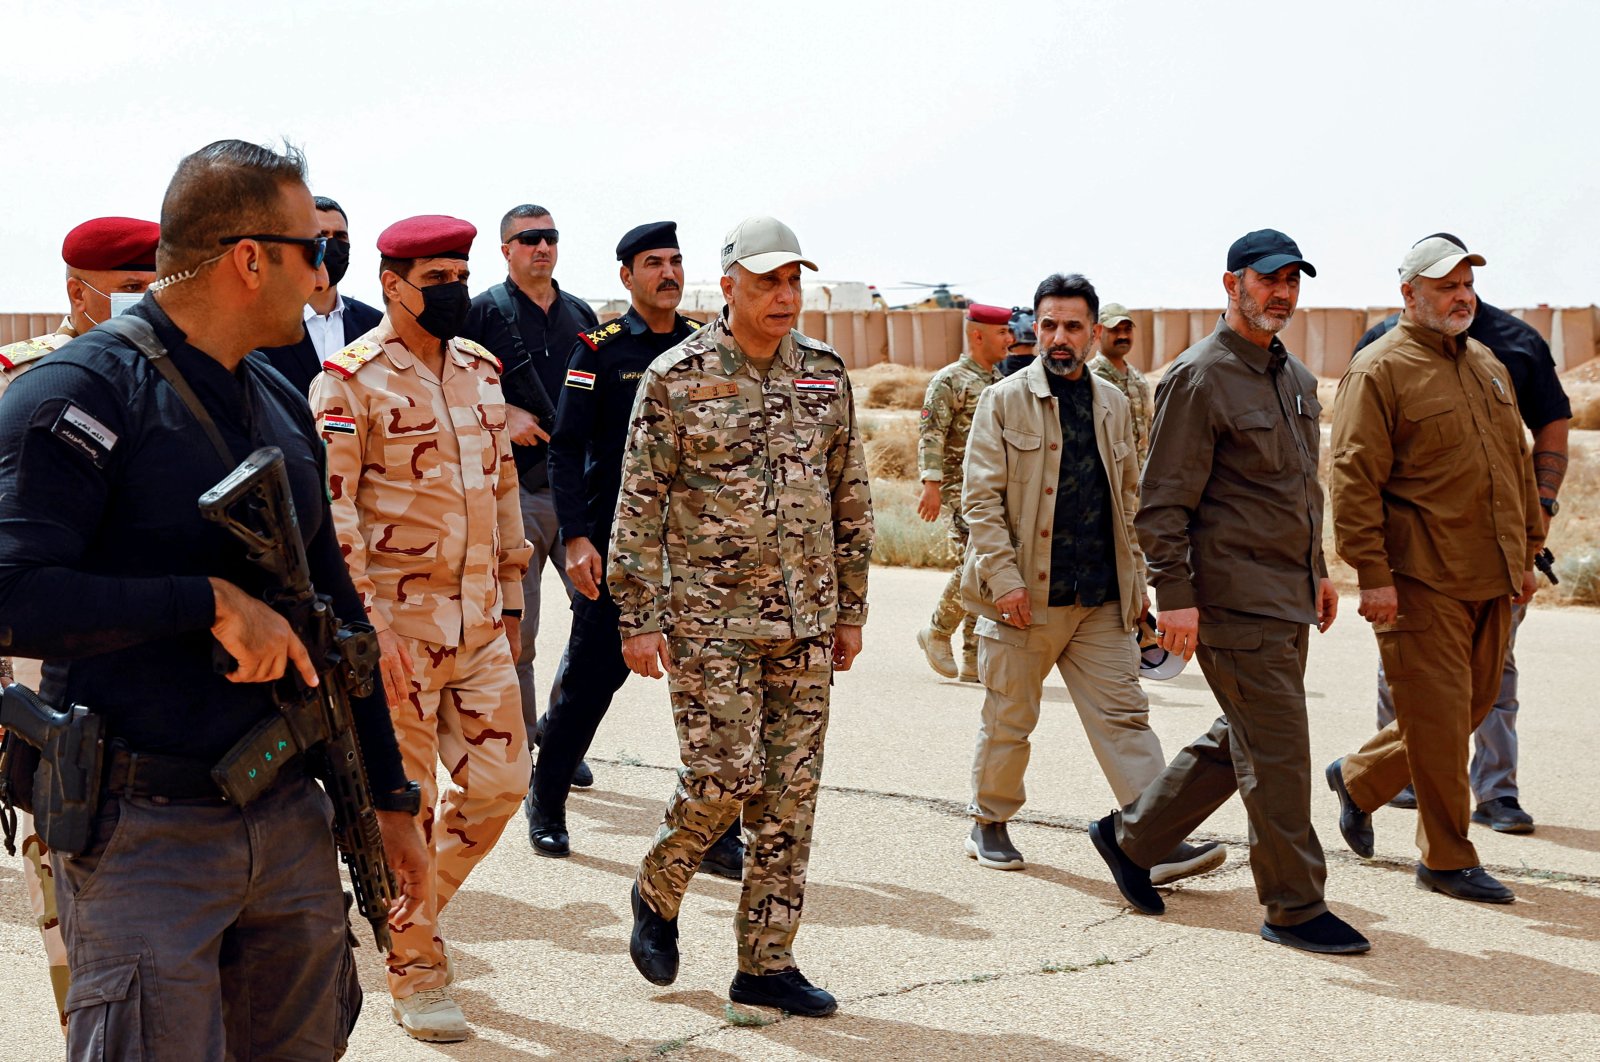 Iraqi Prime Minister Mustafa al-Kadhimi arrives to supervise the "Solid Will" military operation against Daesh in the western region of Anbar, Iraq, April 23, 2022. (Reuters Photo)